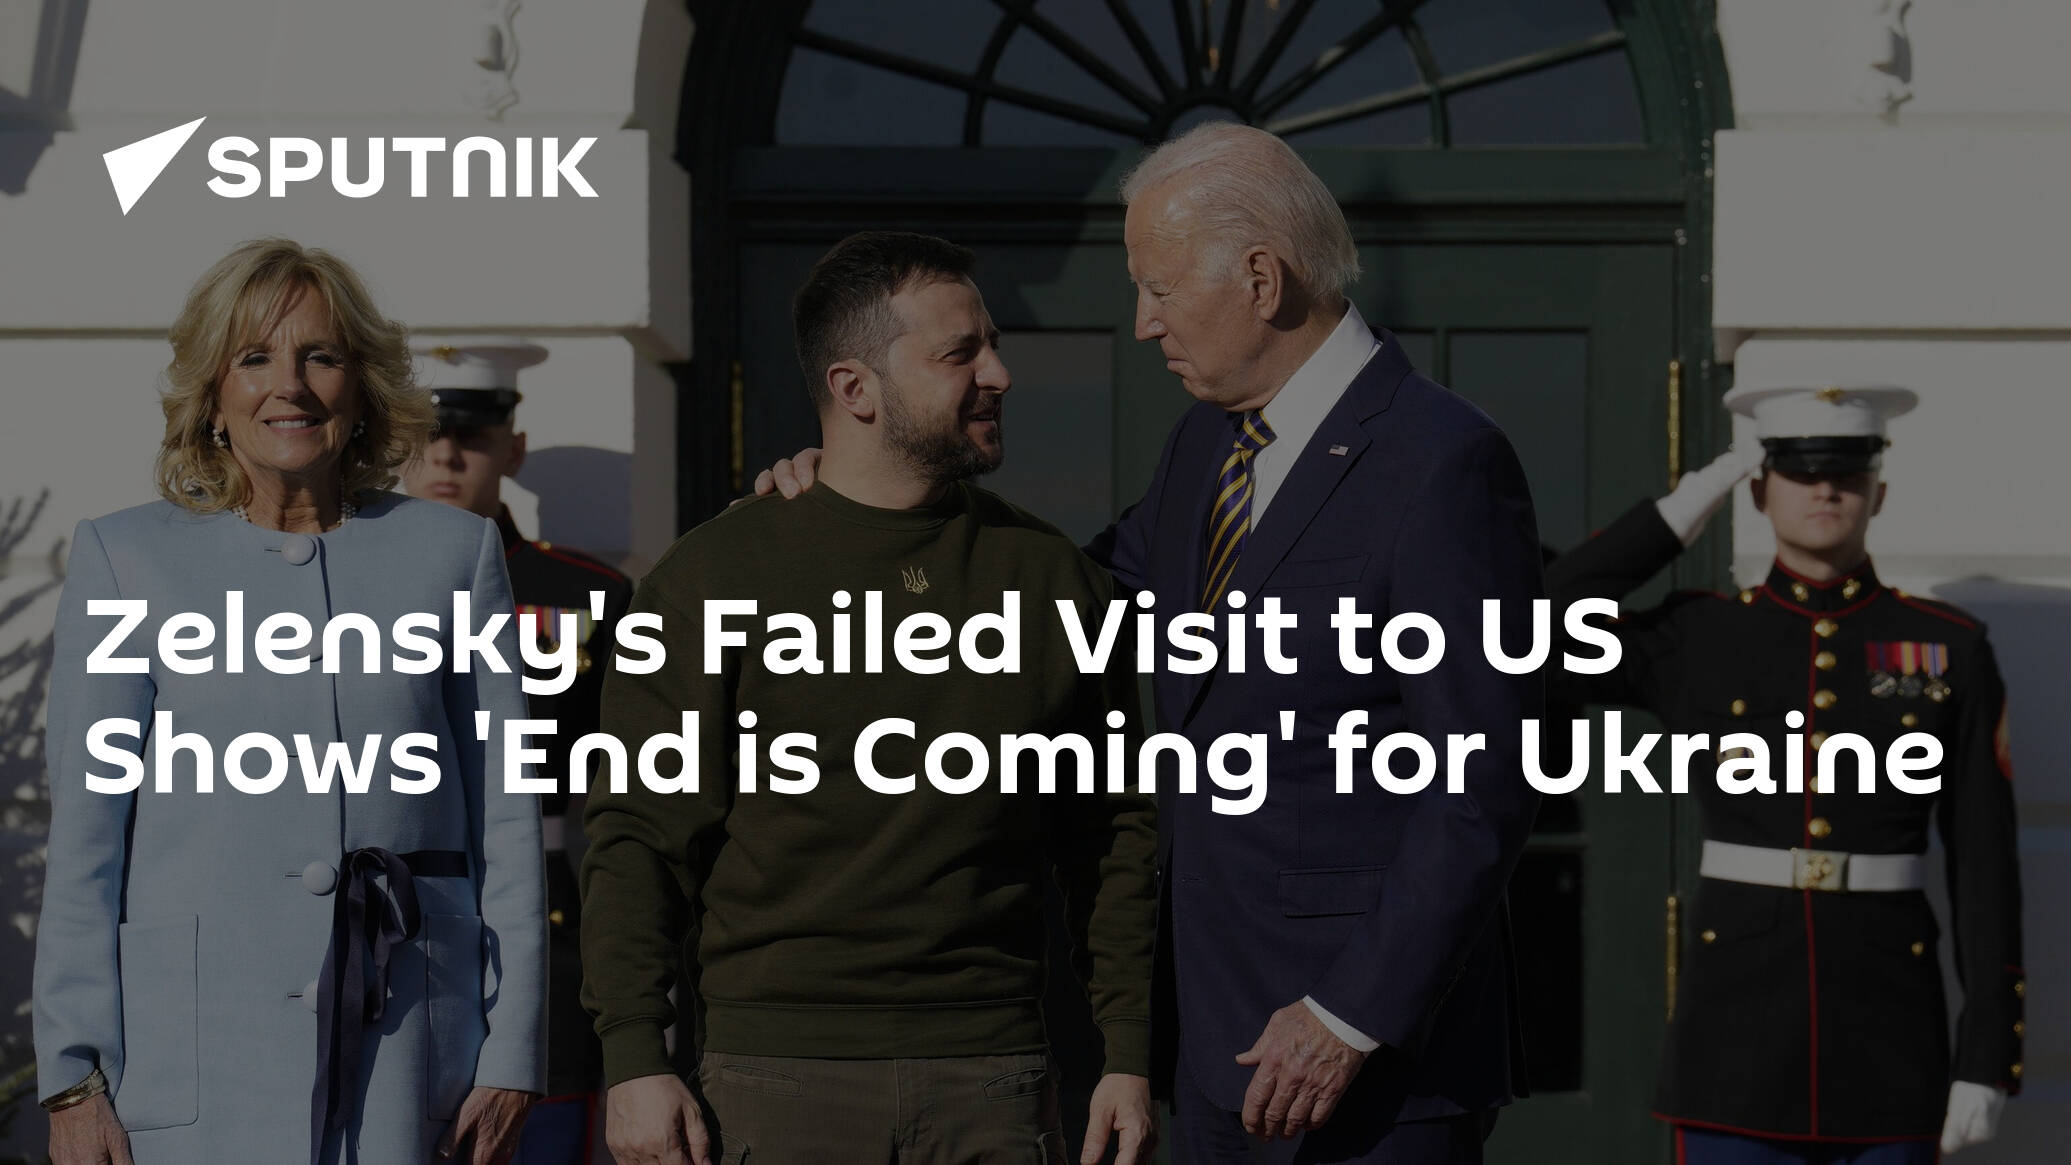 Zelensky's Failed Visit to US Shows 'End is Coming' for Ukraine